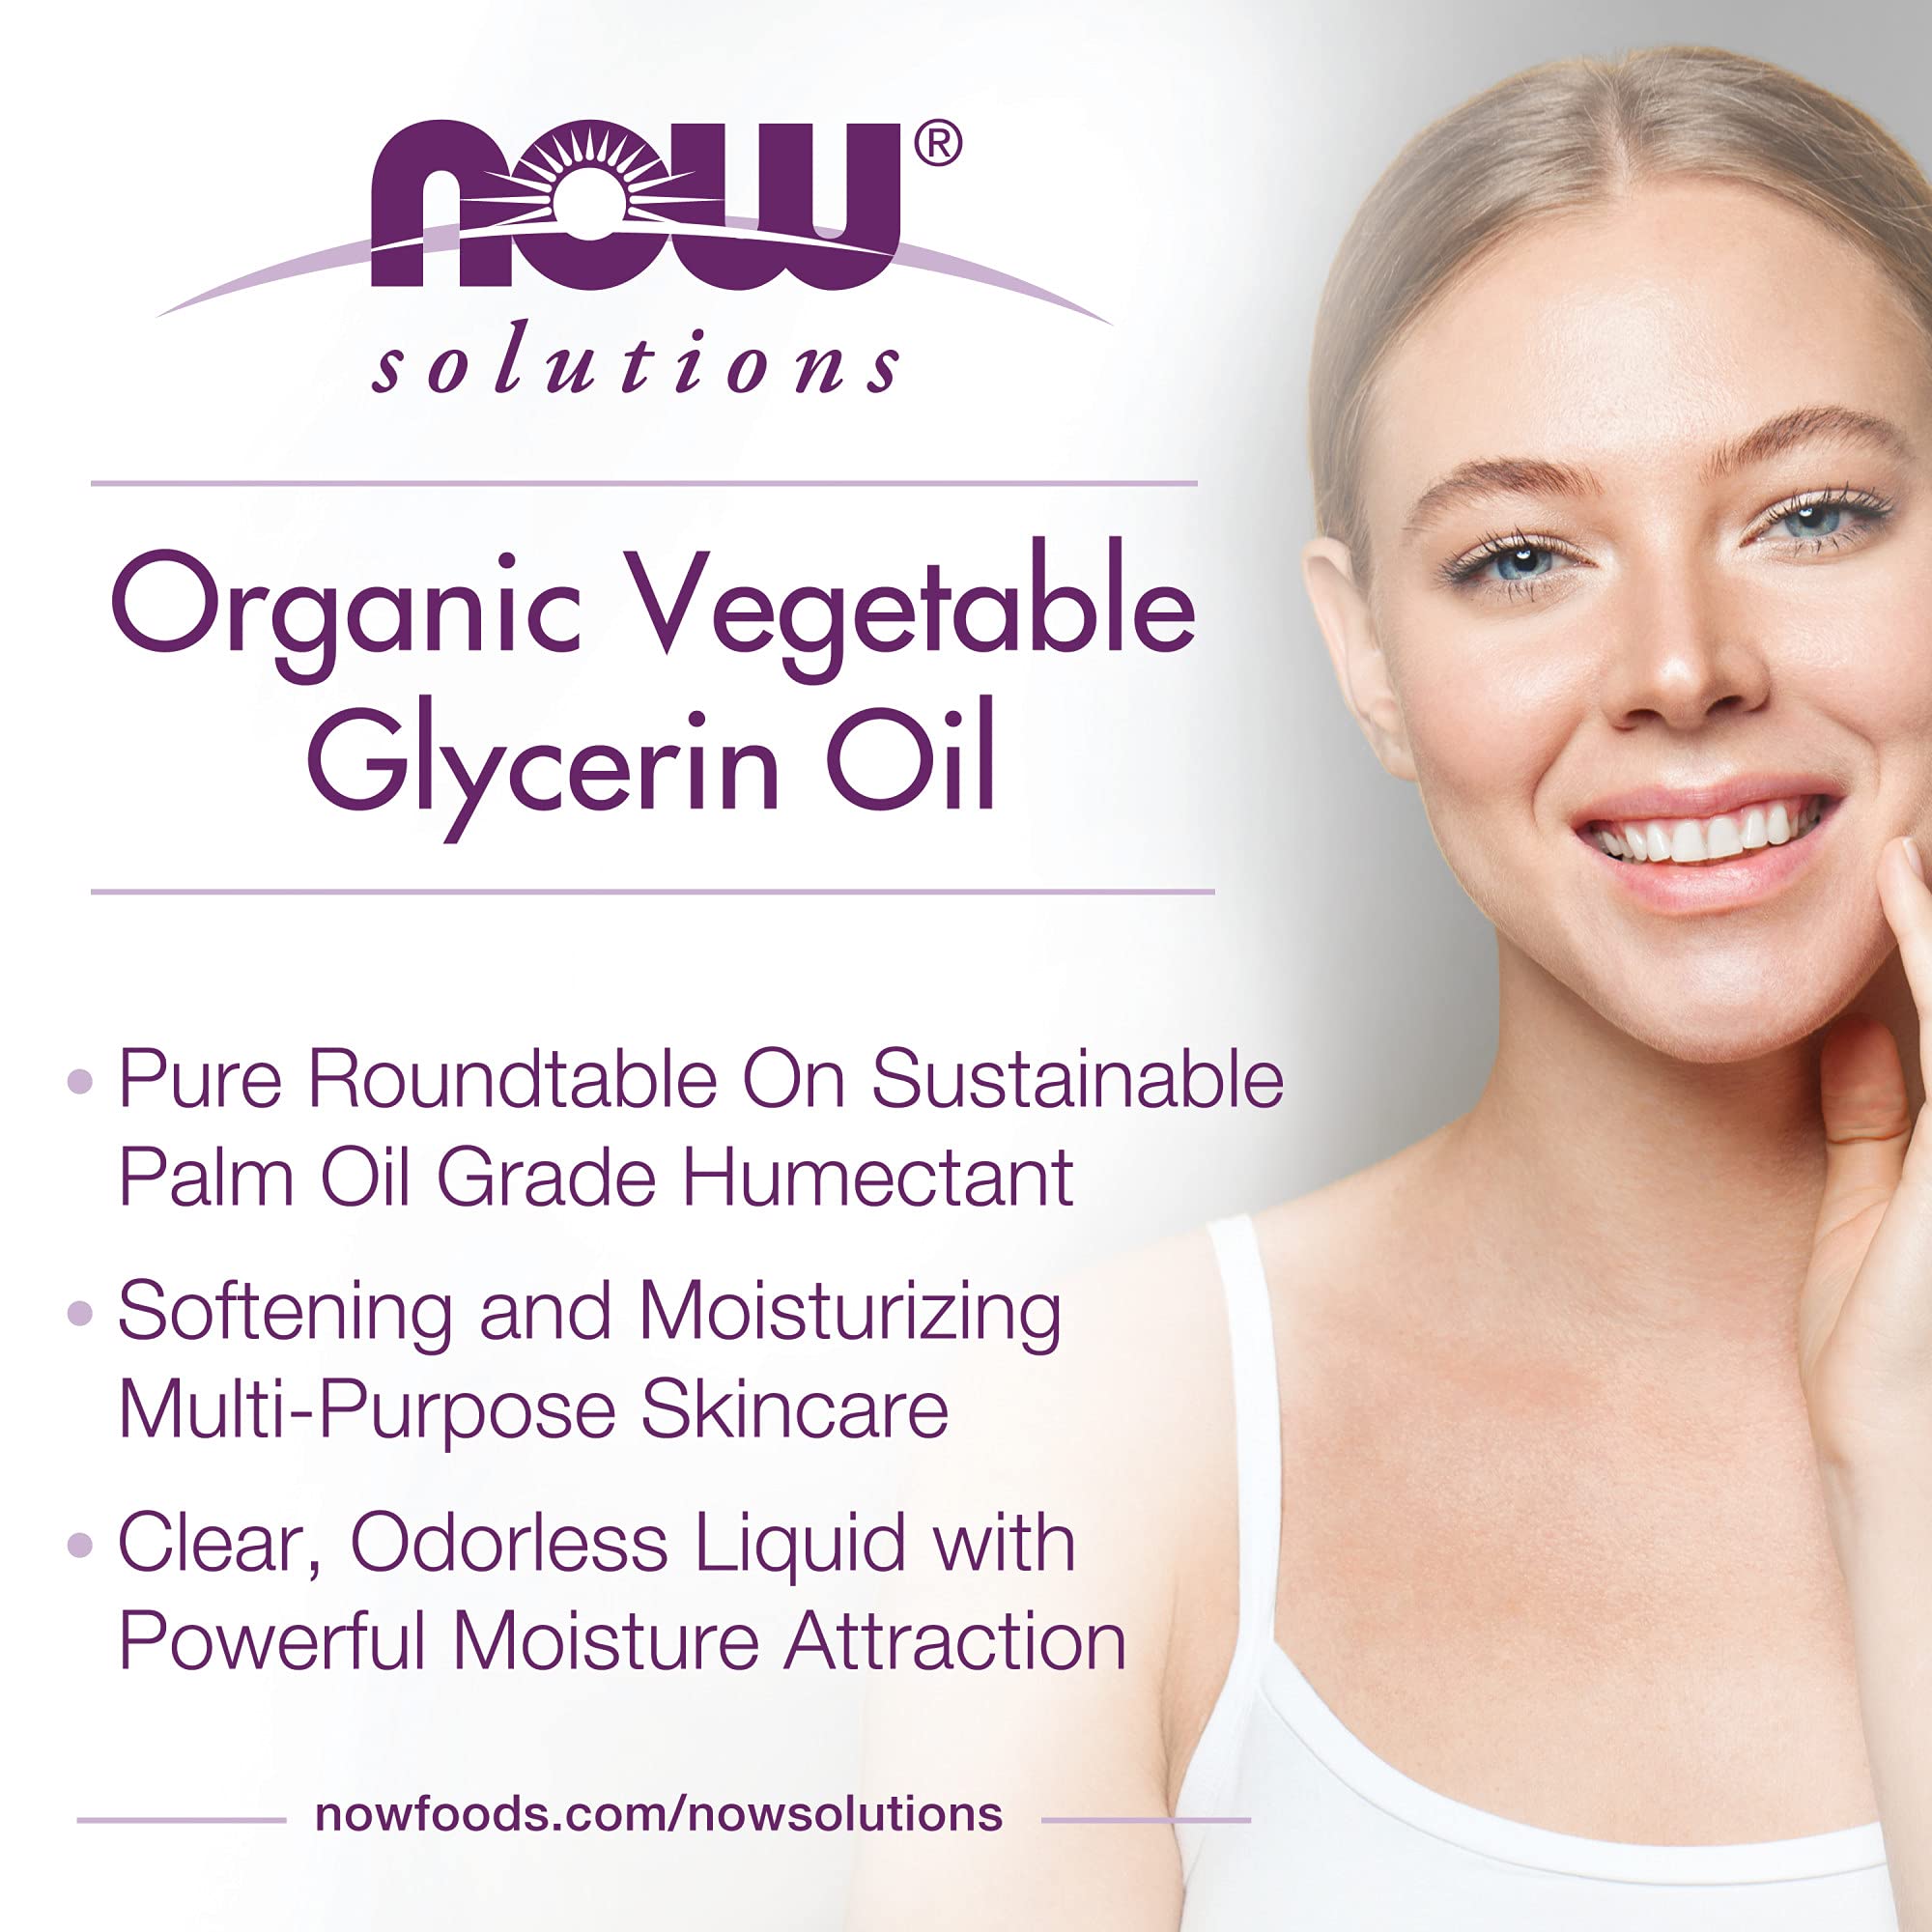 NOW Solutions, Organic Vegetable Glycerin Oil, 100% Pure, Softening and Moisturizing Multi-Purpose Skin Care, 8-Ounce